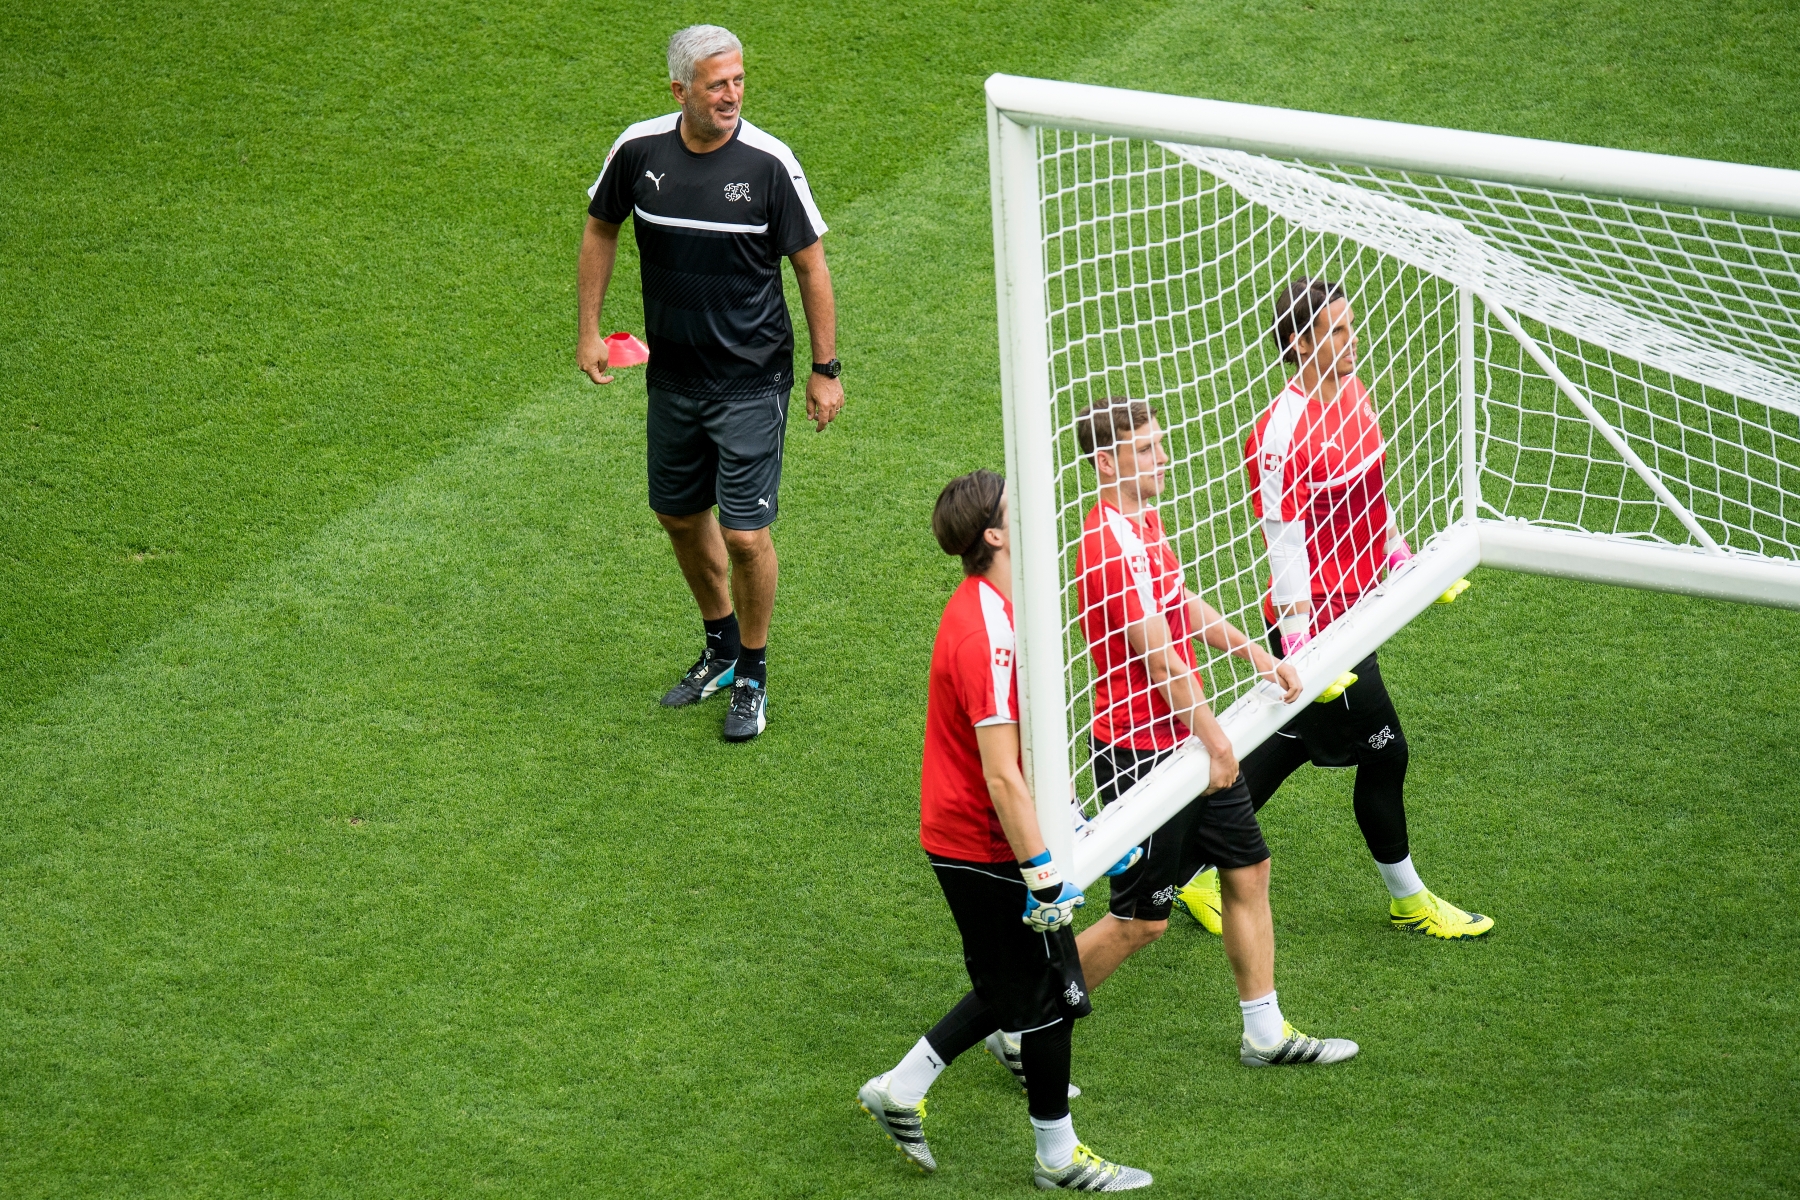 Swiss head coach Vladimir Petkovic, left, reacts next to his players during a training session, at the Geoffroy Guichard stadium in Saint-Etienne, France, Friday, June 24, 2016. The Swiss national soccer team will play a round of 16 match between Poland on Saturday during the UEFA EURO 2016 soccer championship in France. (KEYSTONE/Jean-Christophe Bott) FRANCE SWITZERLAND SOCCER EURO 2016